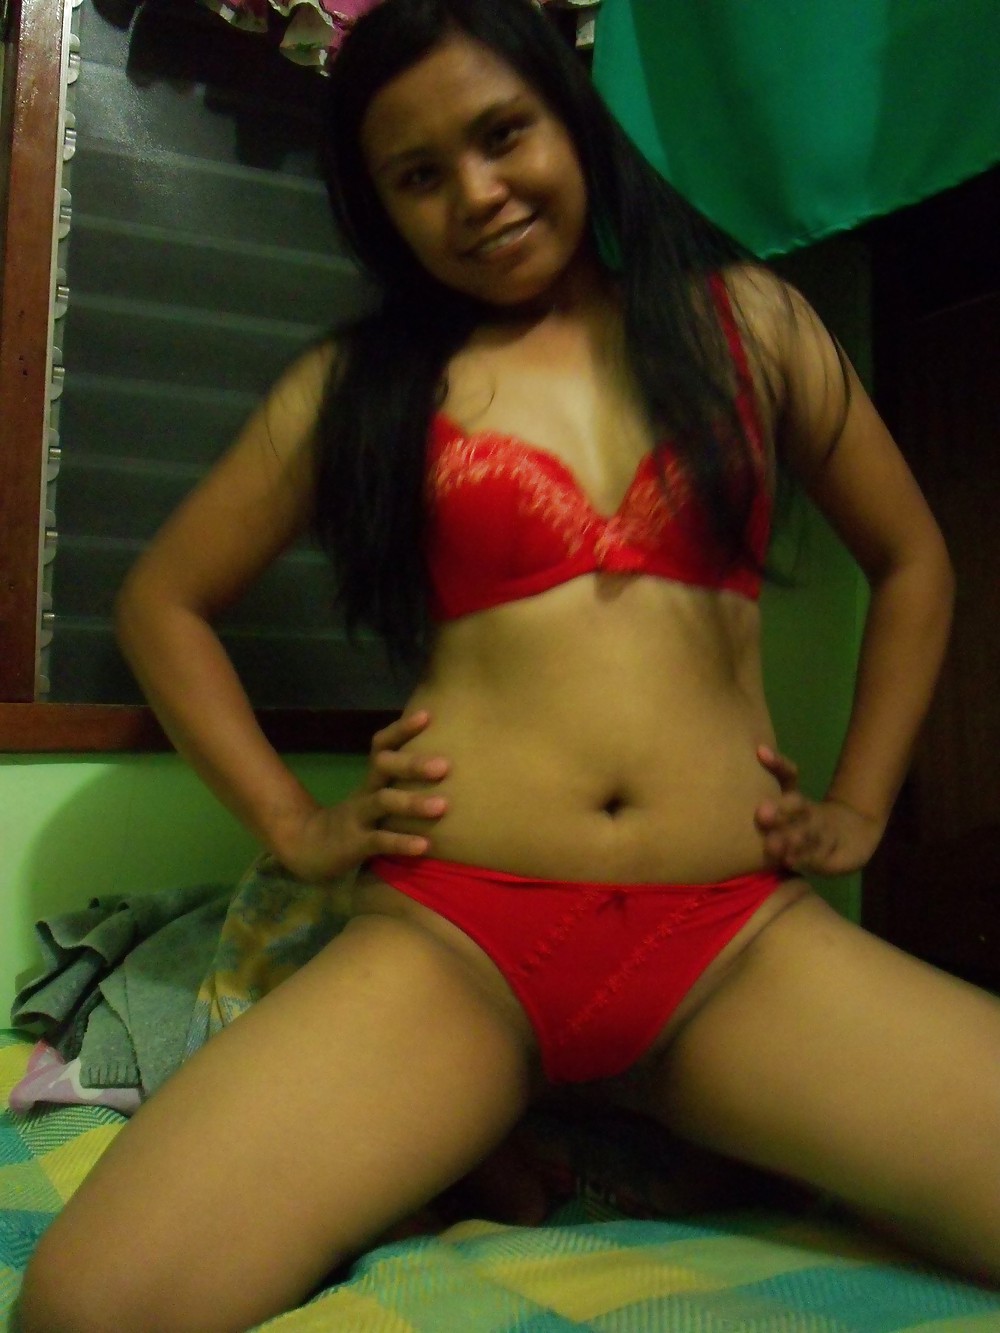 Her name is Ivy she is Filipino met her online  #24790922